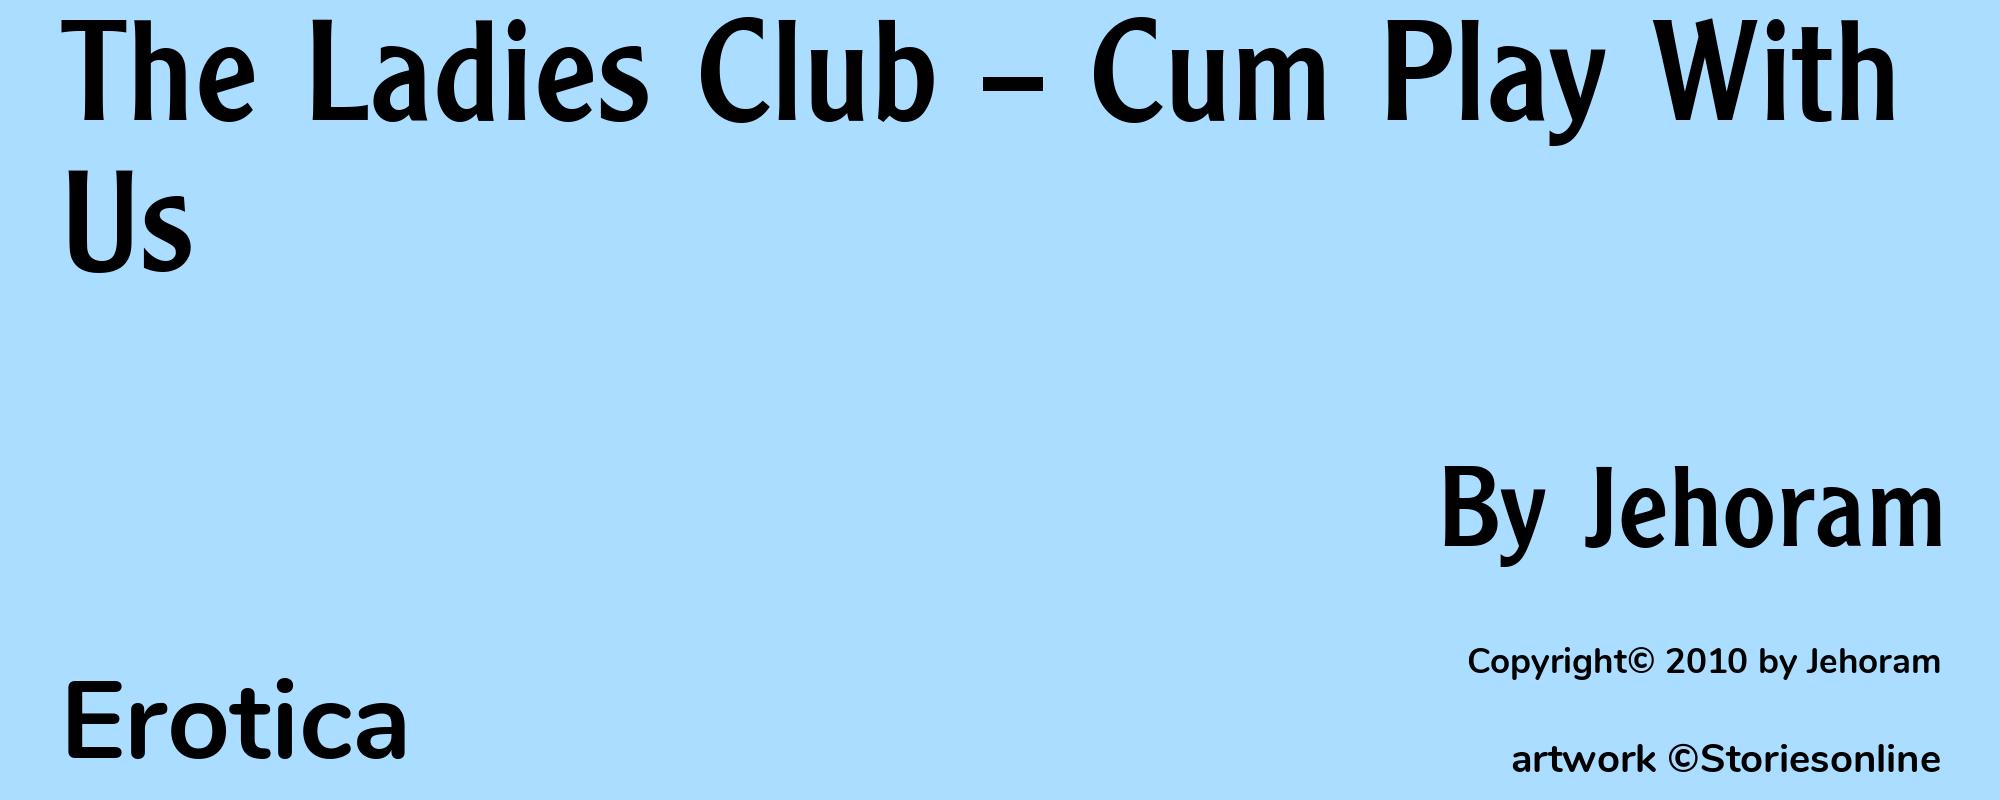 The Ladies Club -- Cum Play With Us - Cover